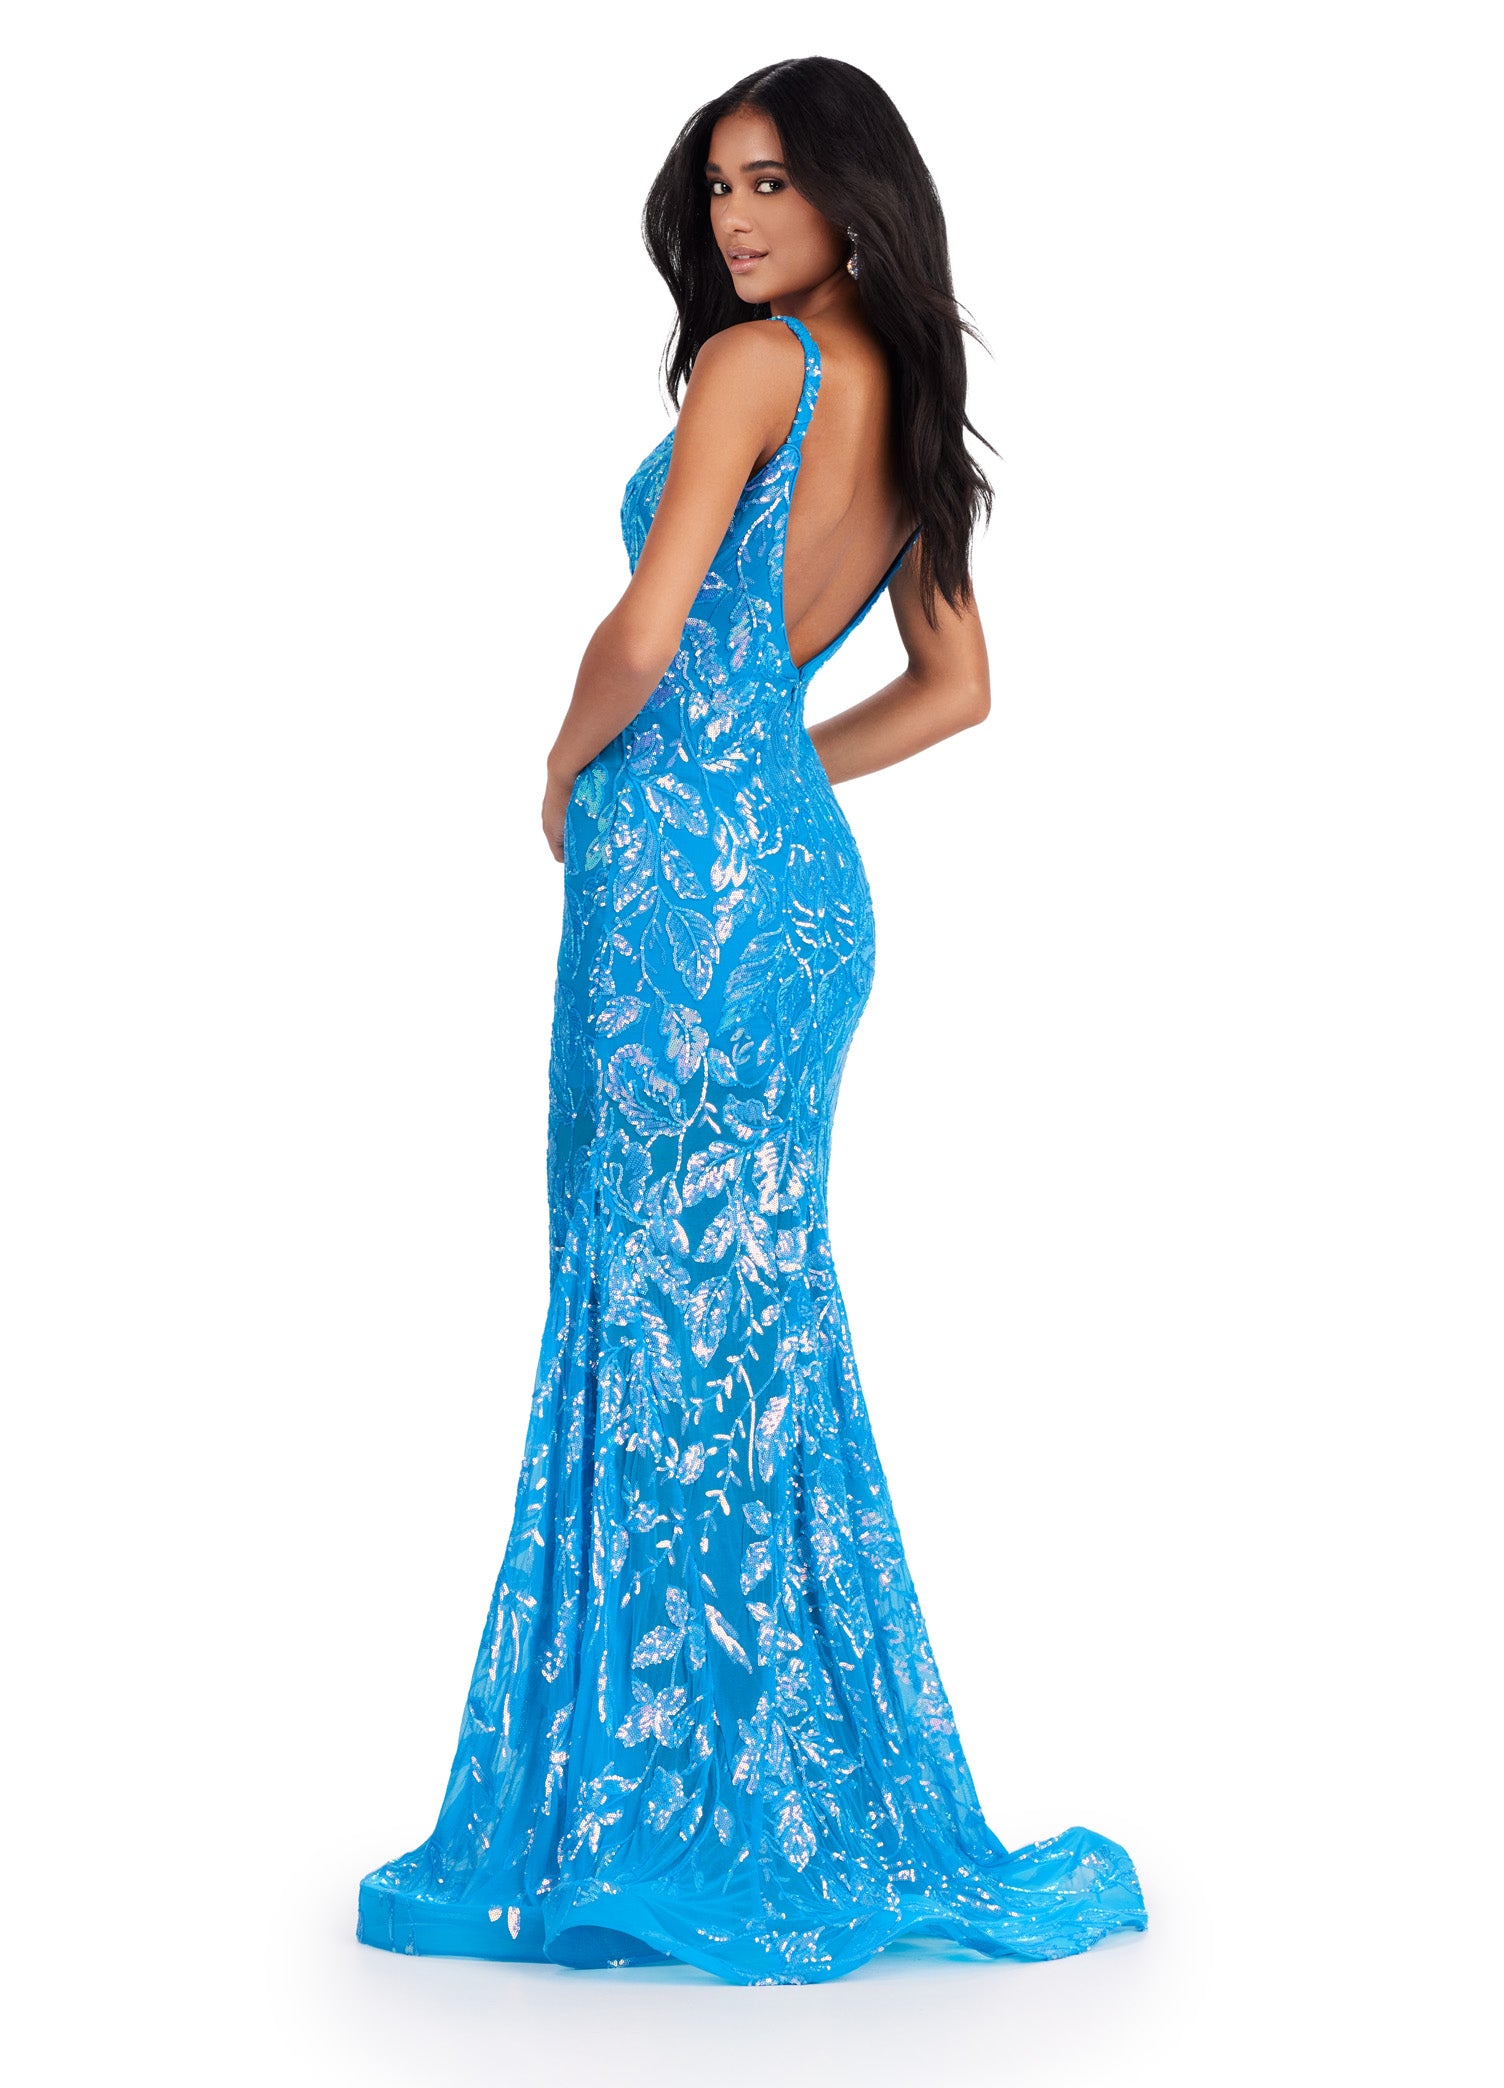 Elevate your prom or pageant look with the Ashley Lauren 11444 gown. Featuring a dazzling sequin design, spaghetti straps, and a low back, this formal dress is sure to turn heads. Its long length adds elegance, while the spaghetti straps provide comfort and support. Make a statement with this stunning gown. Look like royalty in this fully sequin gown! From its elegant top, open back and flare skirt, this gown has it all!